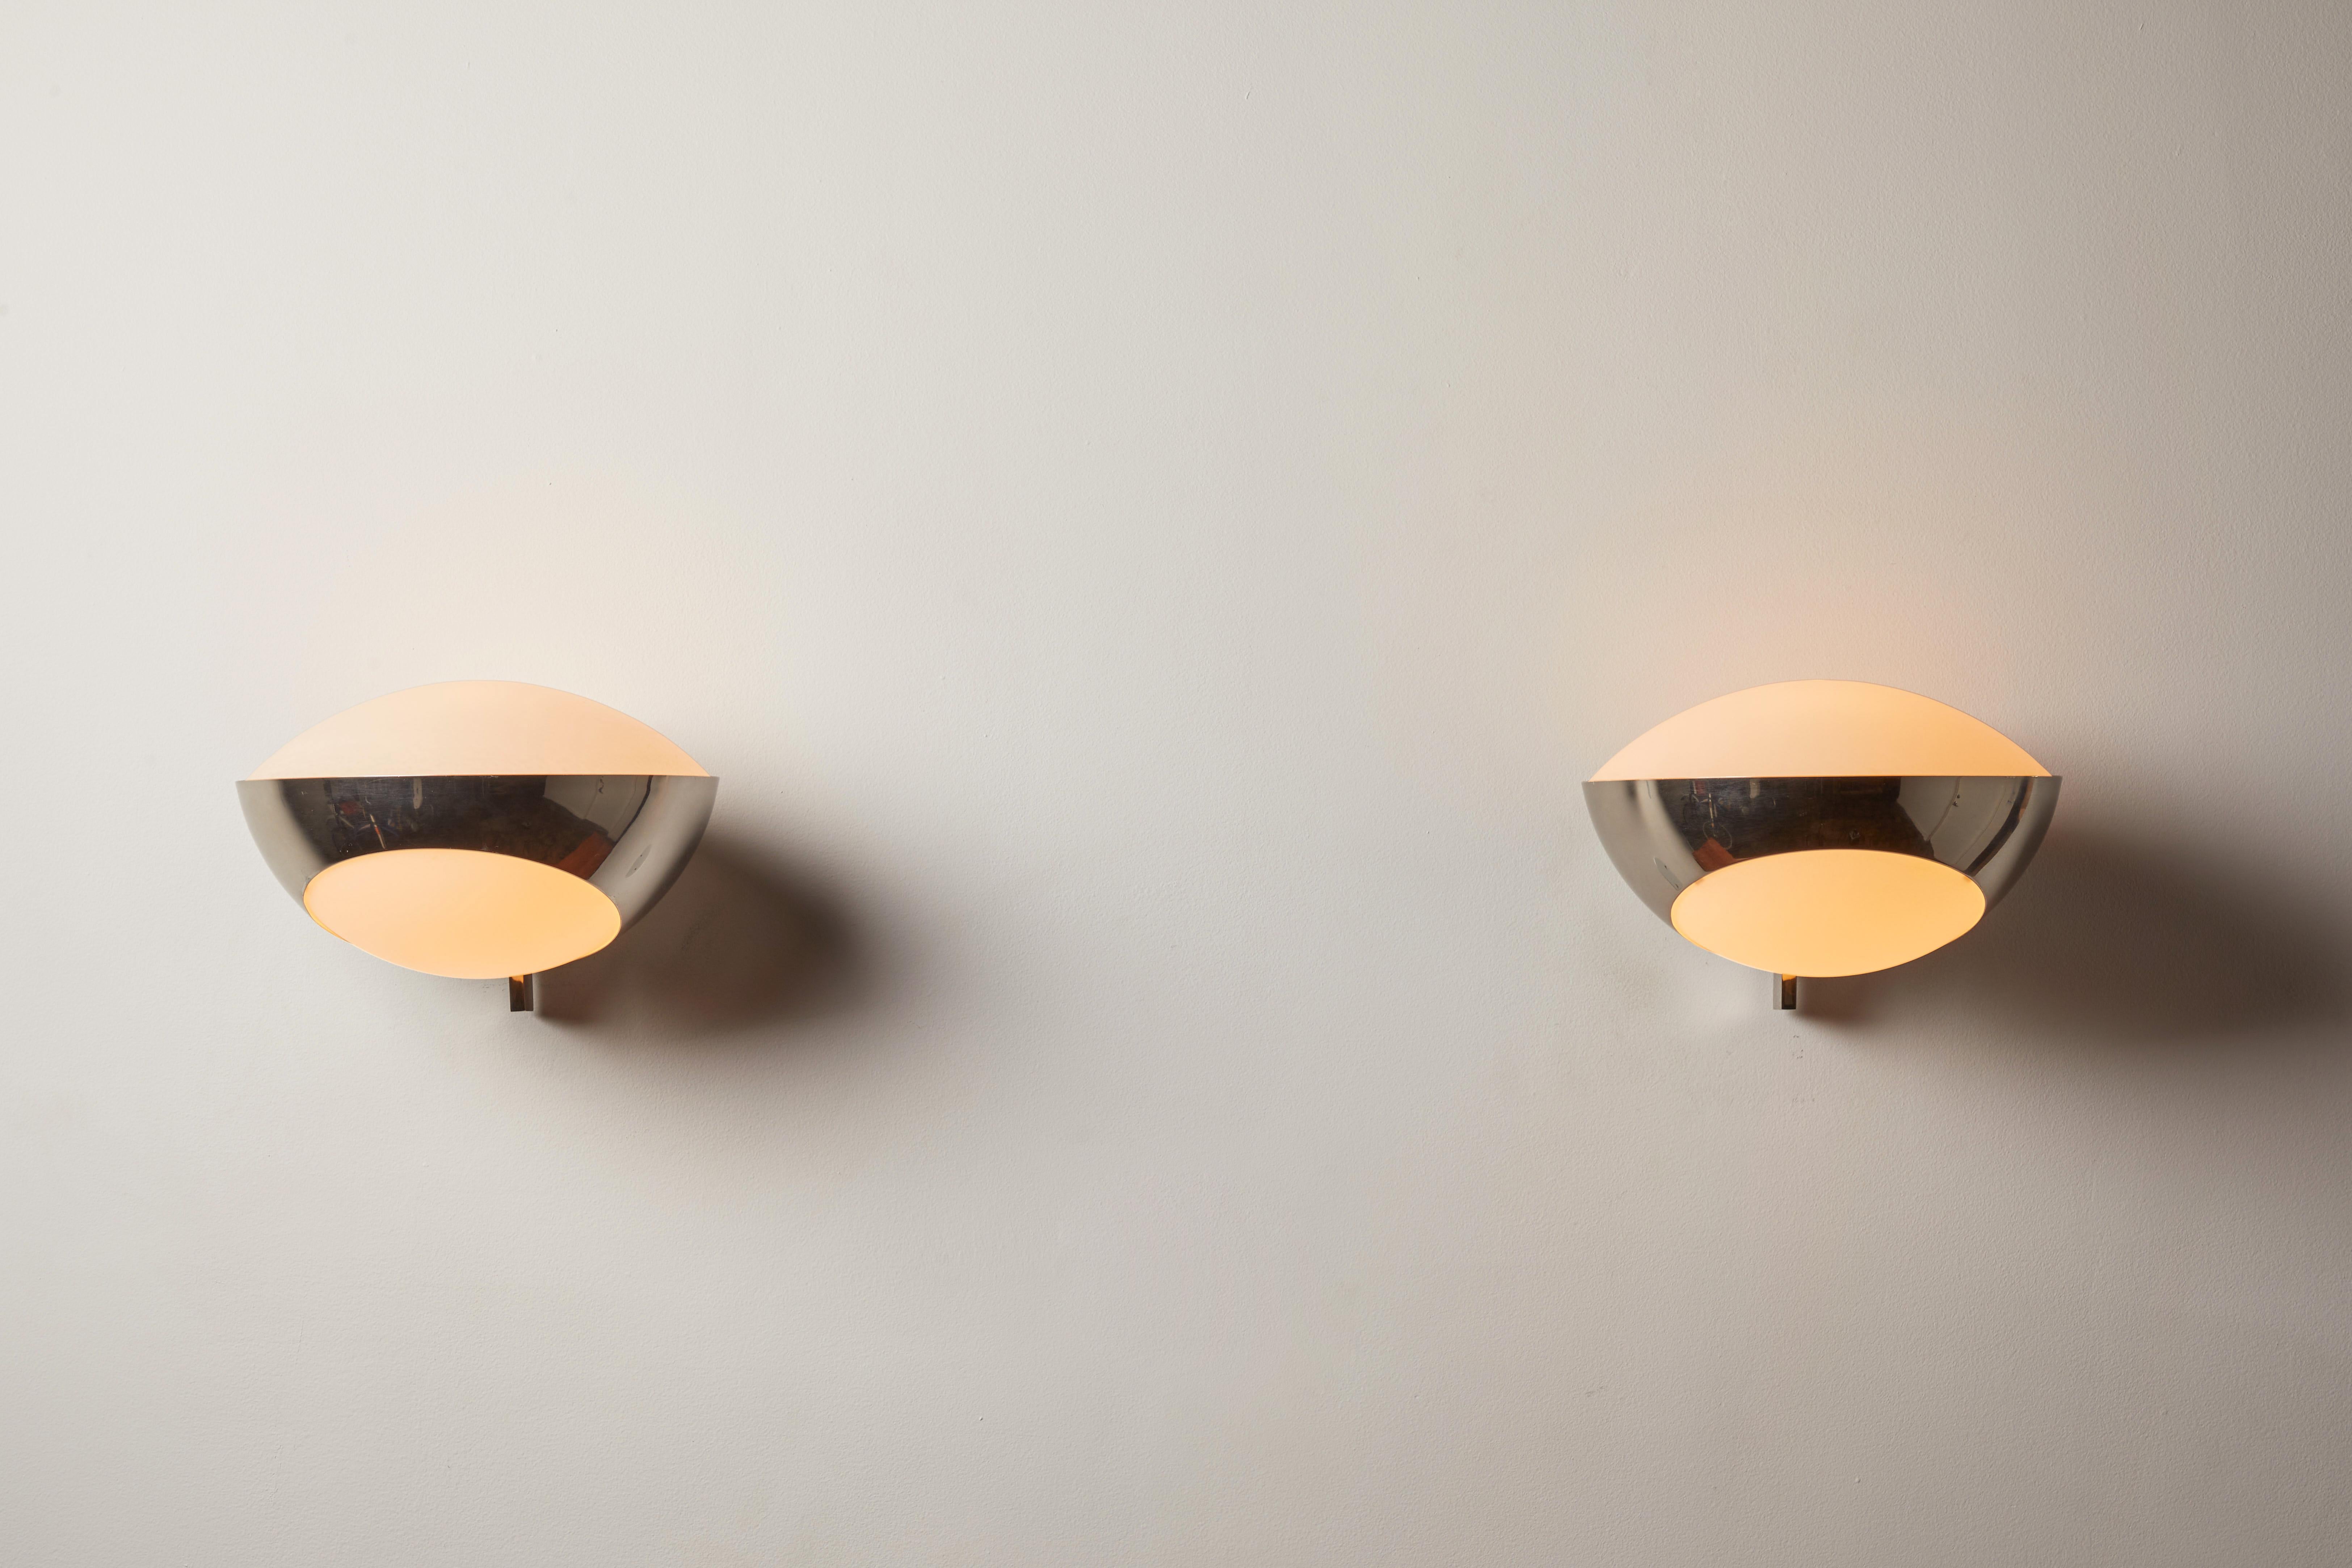 Pair of large Model No. 1963 Sconces by Max Ingrand for Fontanta Arte. Designed and manufactured in Italy, 1960. Brushed satin glass diffusers, chrome armature. Custom chrome backplates. Each light takes one E27 60w maximum bulb. Bulbs provided as a